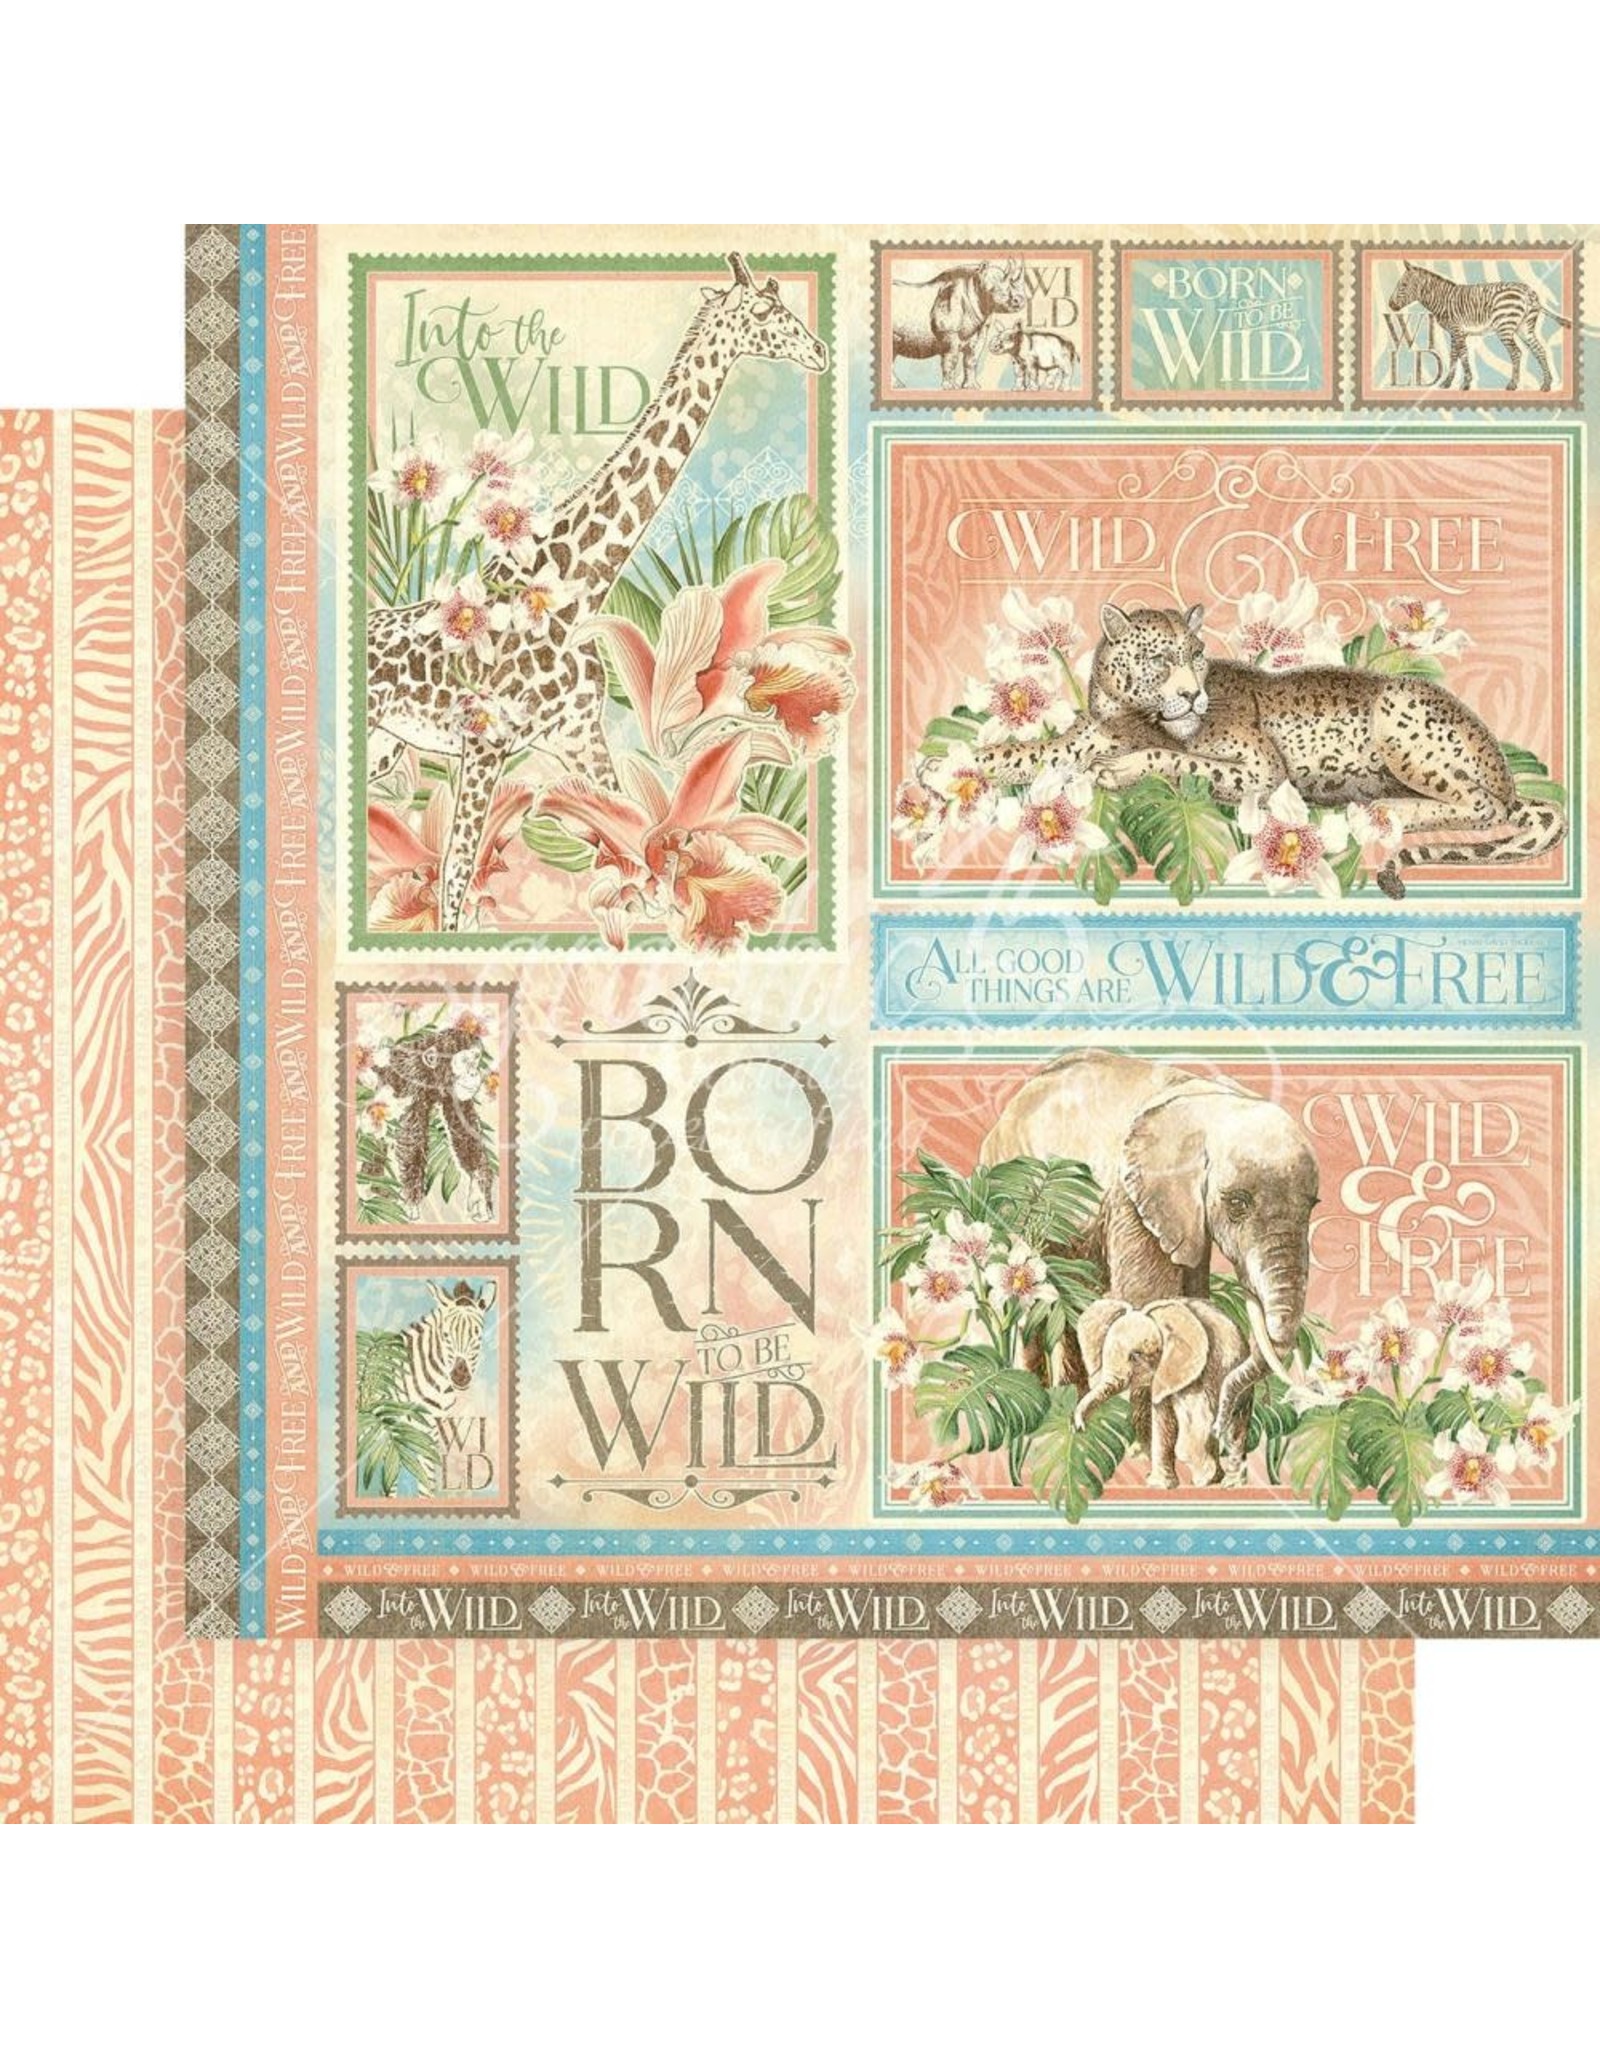 GRAPHIC 45 GRAPHIC 45 WILD AND FREE COLLECTION BORN TO BE WILD 12x12 CARDSTOCK